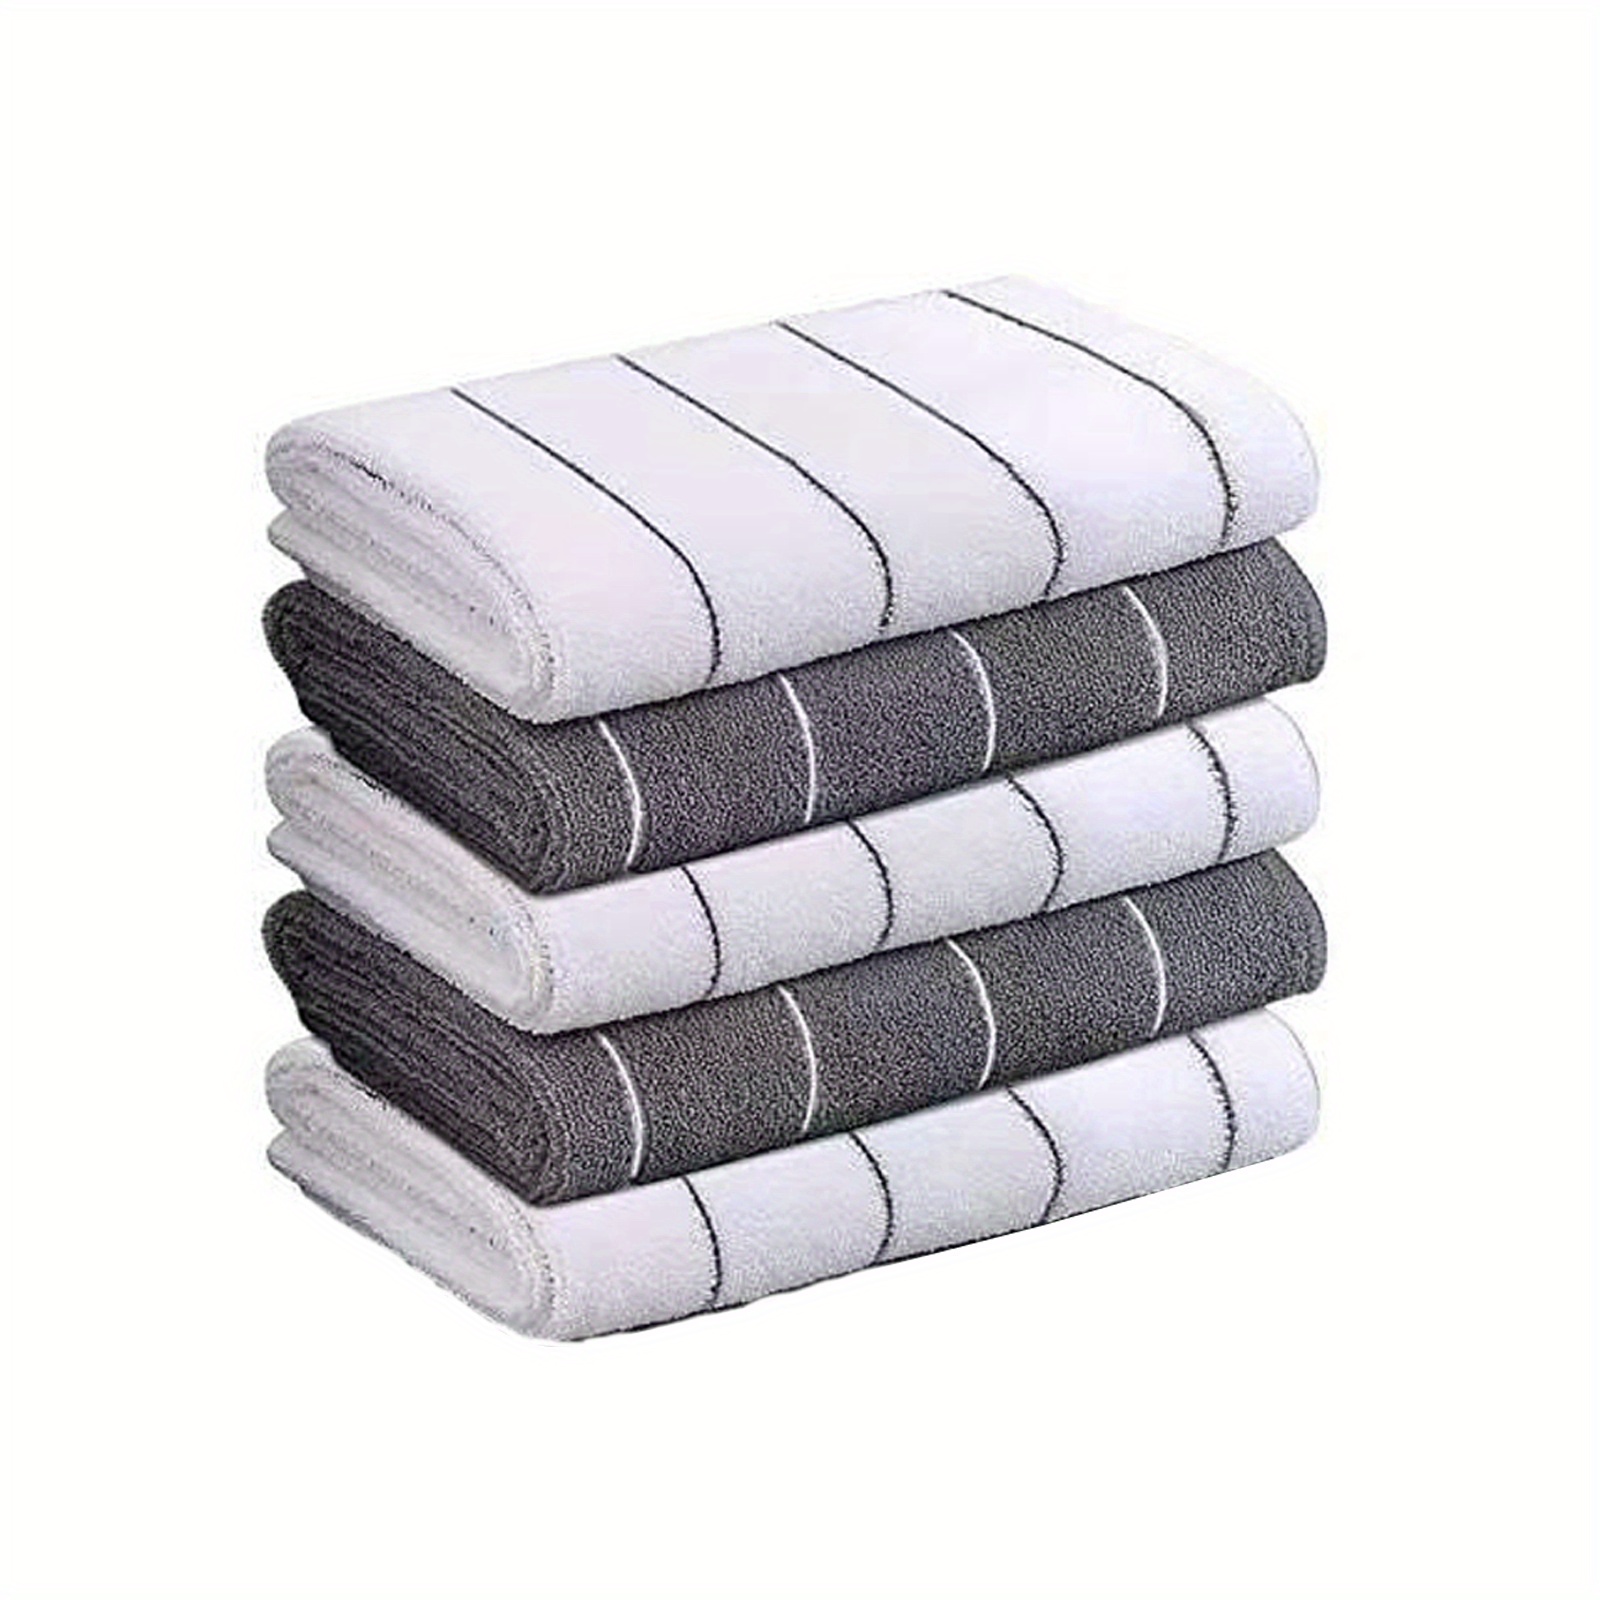 Hyer Kitchen Microfiber Dish Towels, Stripe Designed, Super Soft and Absorbent Dishcloth, Pack of 8, 12 x 12 inch, Gray and White